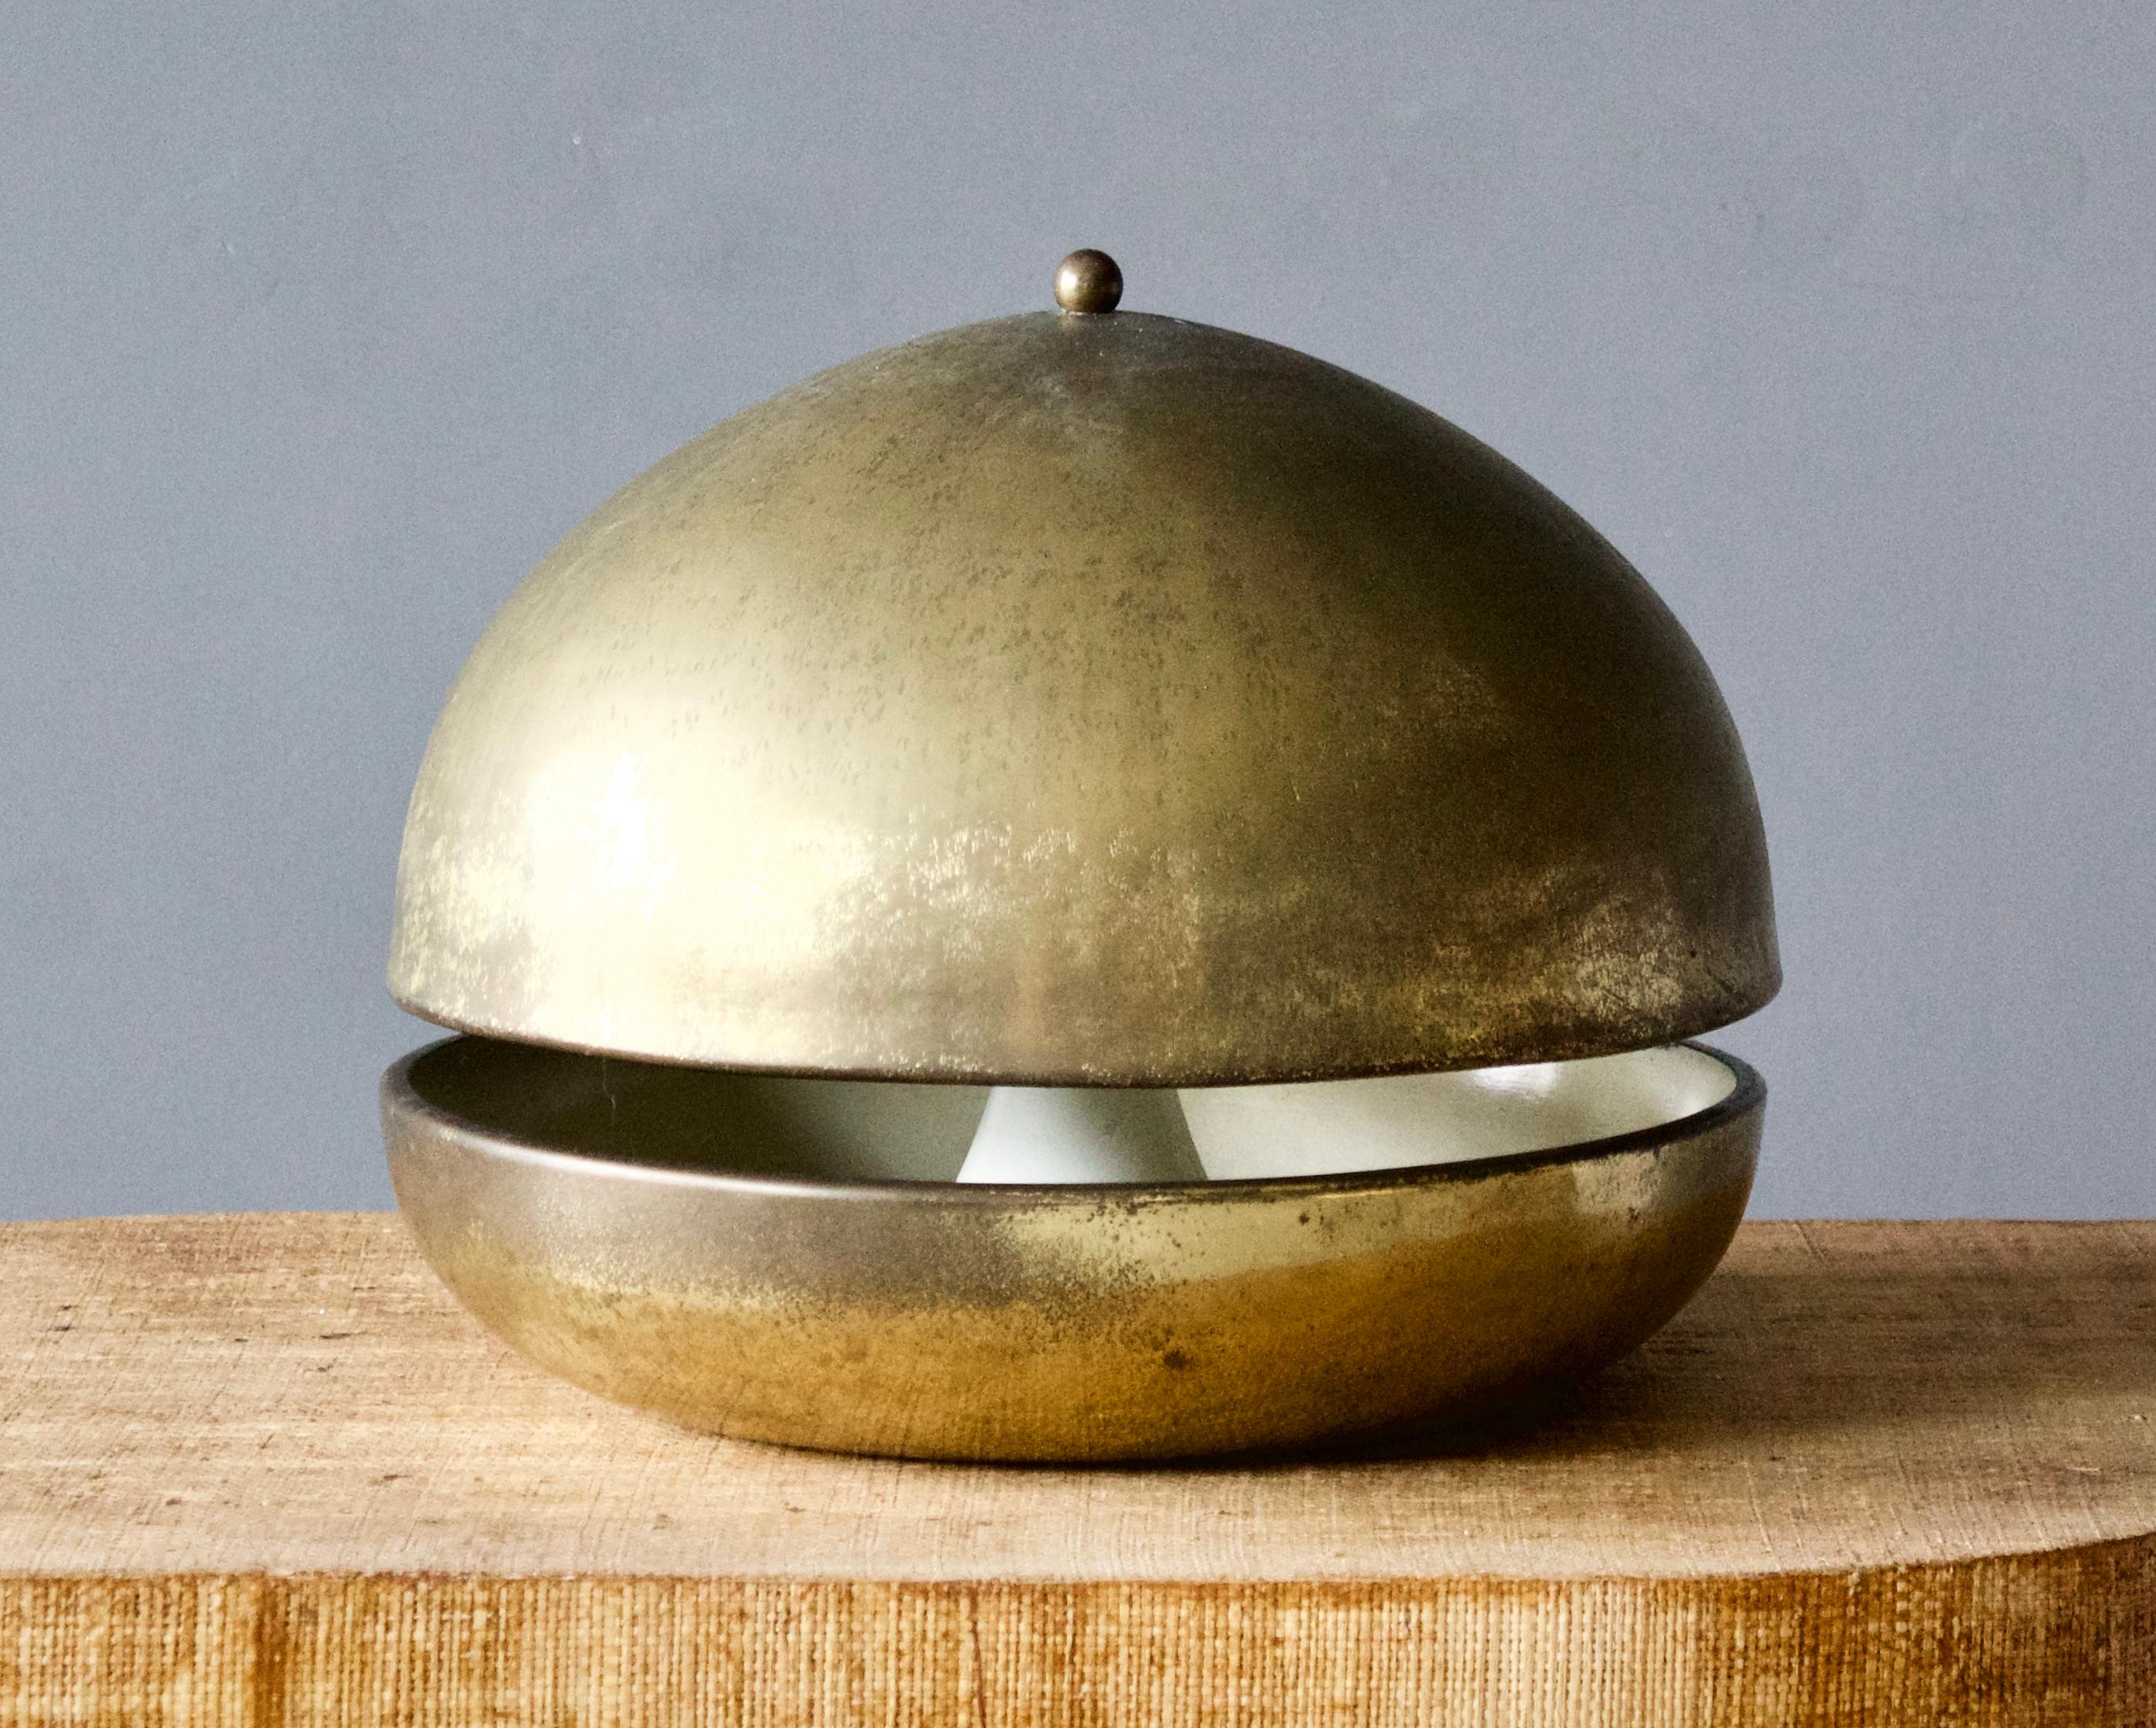 A sizable table lamp, produced in Italy, 1970s. Brass.

Other designers of the period include Gio Ponti, Fontana Arte, Max Ingrand, Franco Albini, and Josef Frank.